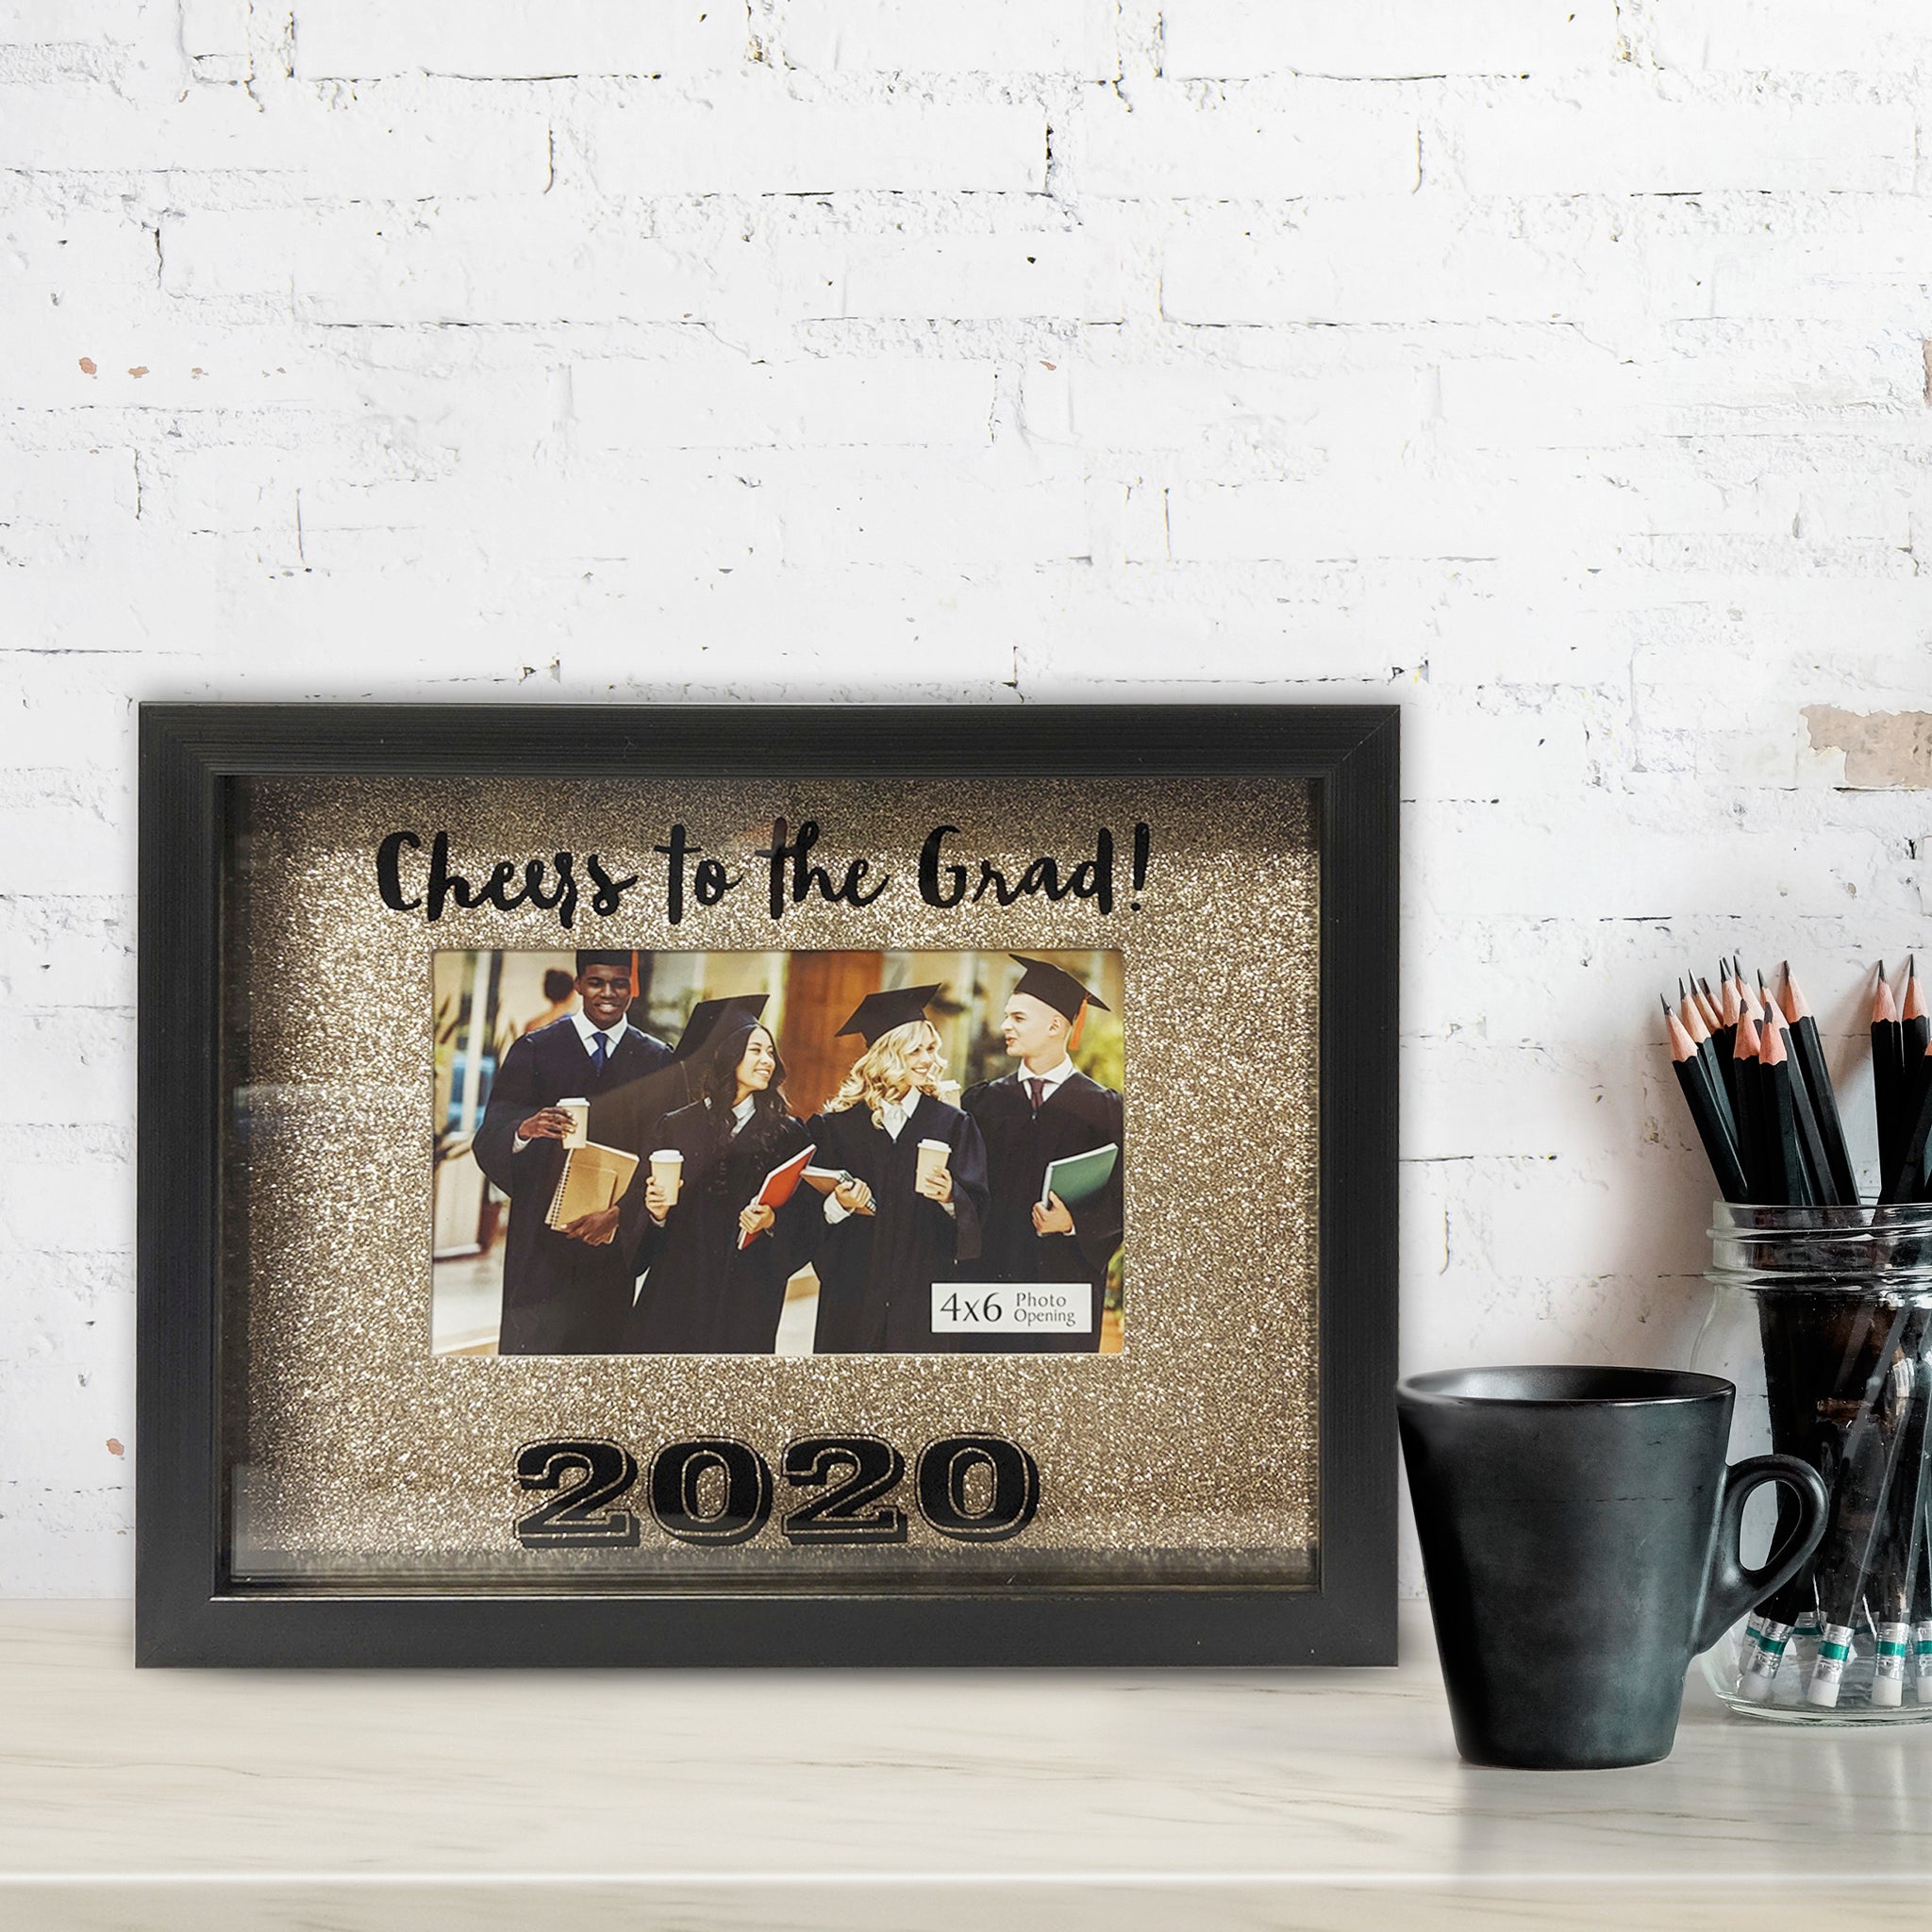 Shadowbox Cheers to the Grad 2020 Picture Frame 4-inch by 6-inch Gold Glitter